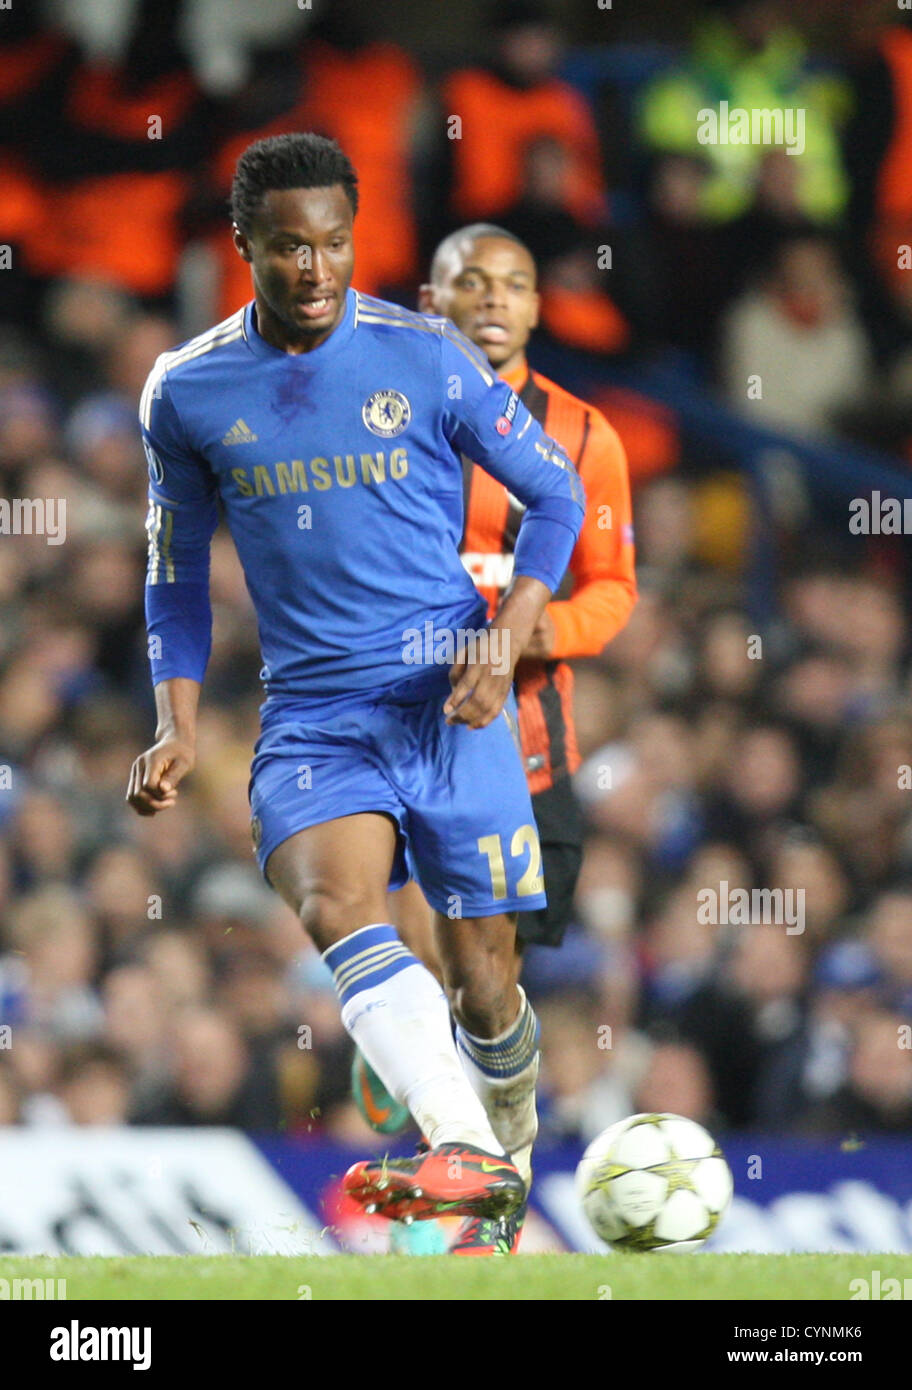 07.11.2012. London, England.  John Obi Mikel of Chelsea in action during the UEFA Champions League Group E game between Chelsea and Shakhtar Donetsk from Stamford Bridge Stock Photo